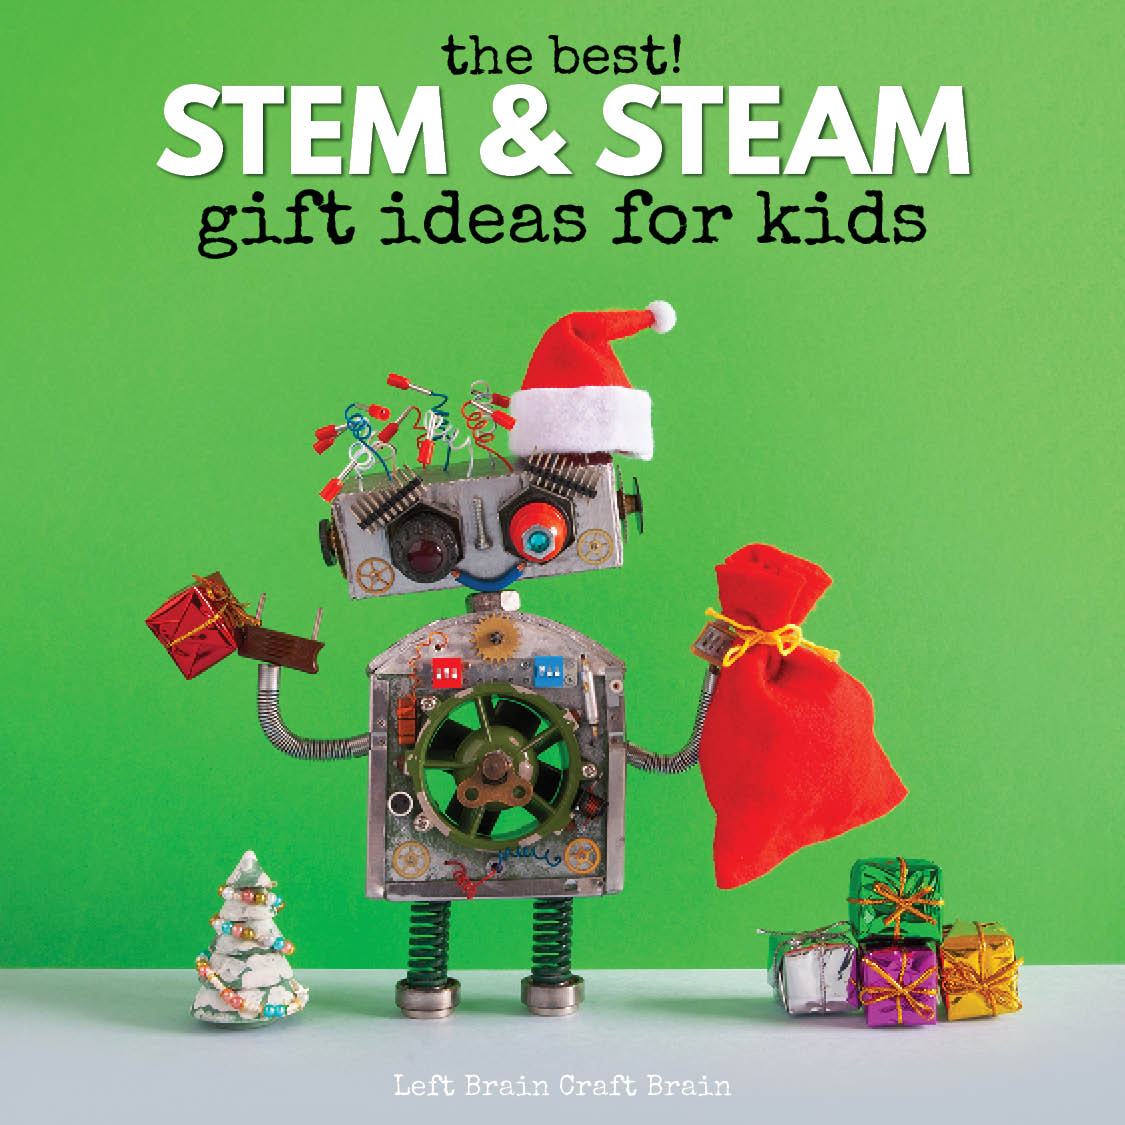 Kids will love getting gifts from this list of STEAM & STEM Gift Ideas for Kids! It's filled with STEM toys, engaging books, robots, tech toys, building kits, science kits, and more. All perfect gift ideas for the holidays or birthdays.